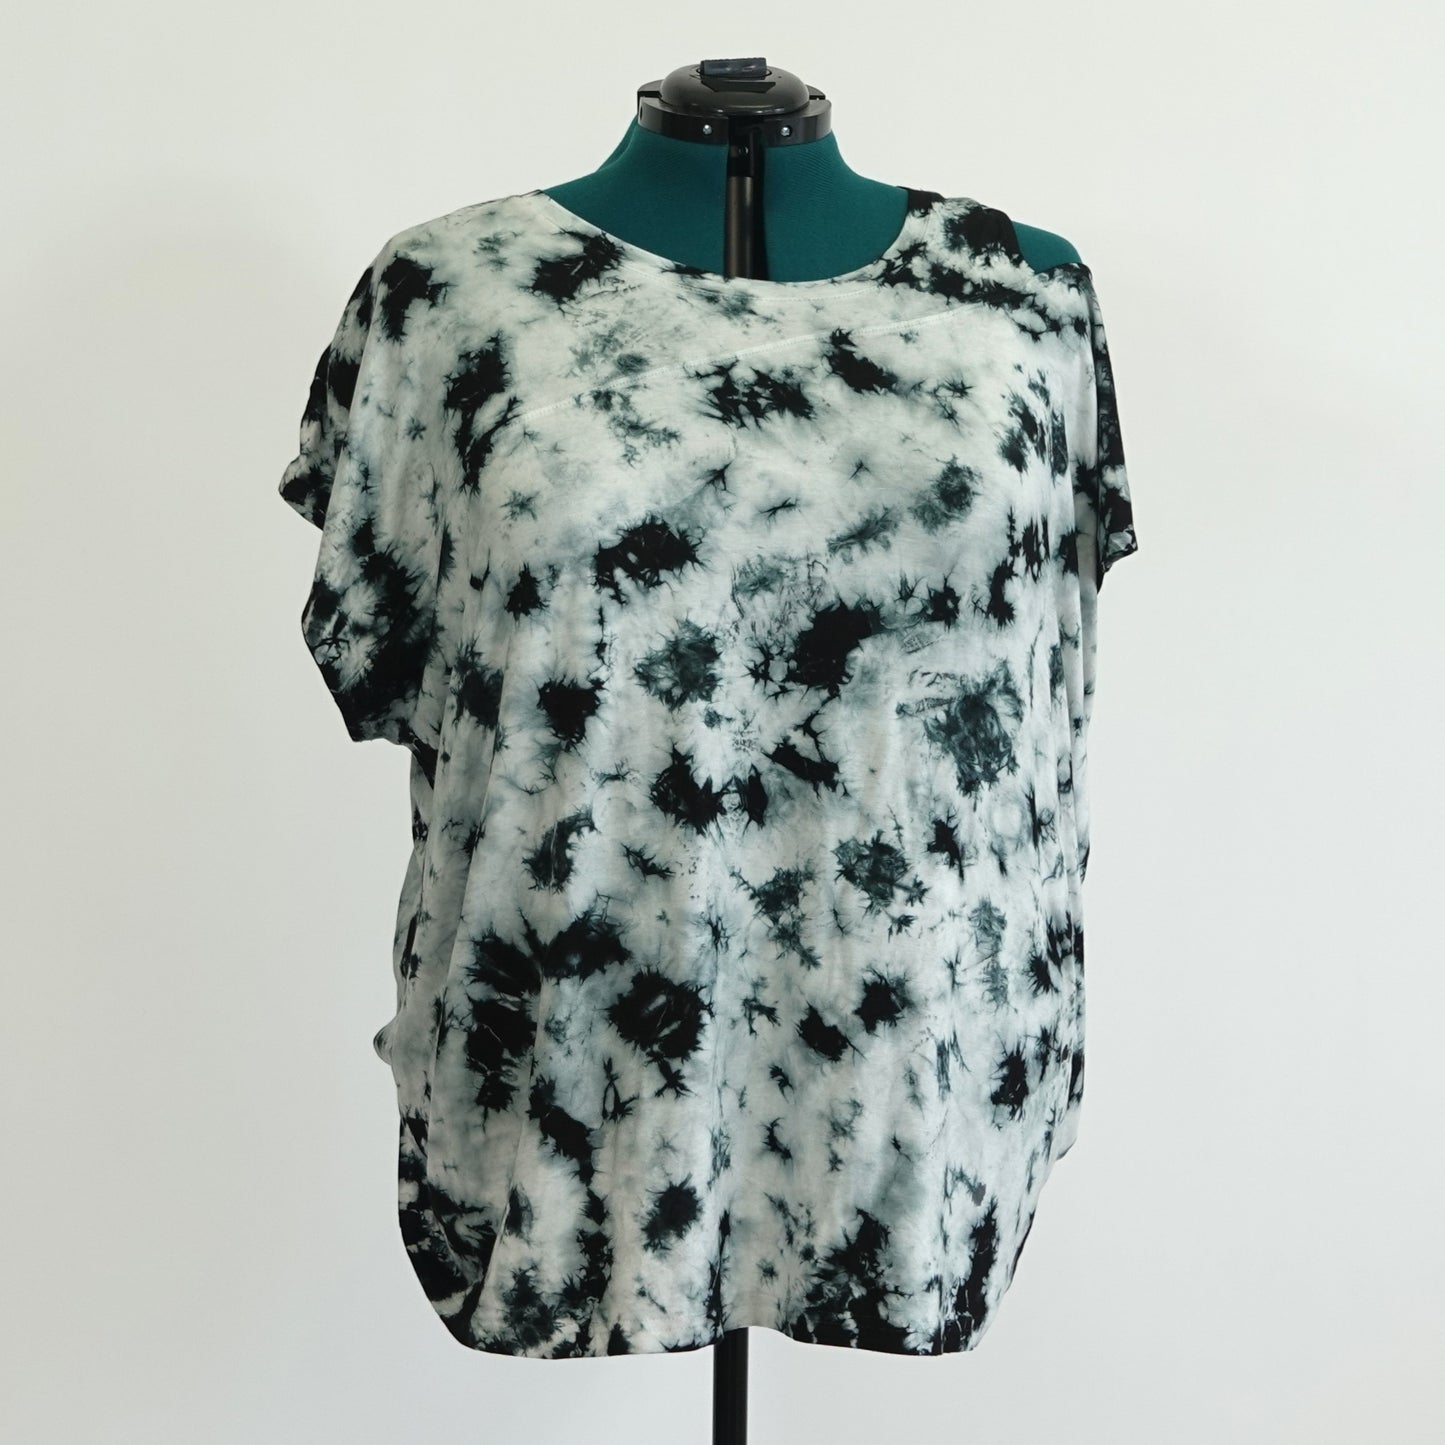 Black and White Tie Dye Cut Out Top